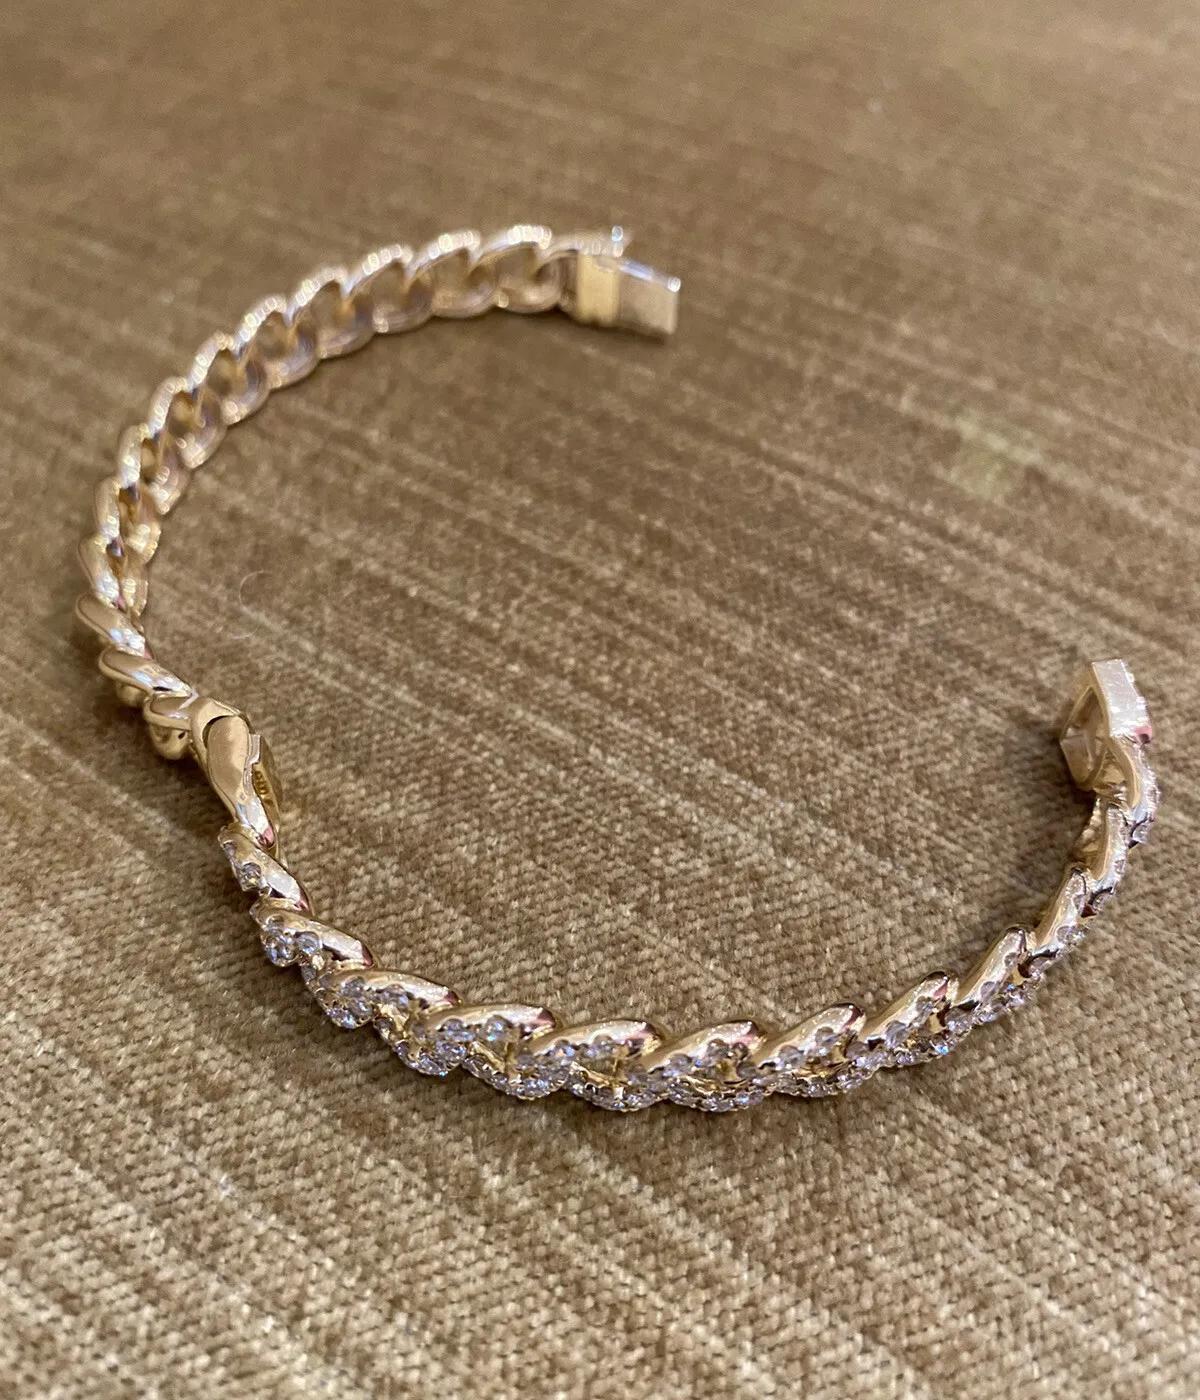 Odelia Diamond Curb Link Bangle Bracelet 2.79 Carats in 18k Yellow Gold In Excellent Condition For Sale In La Jolla, CA